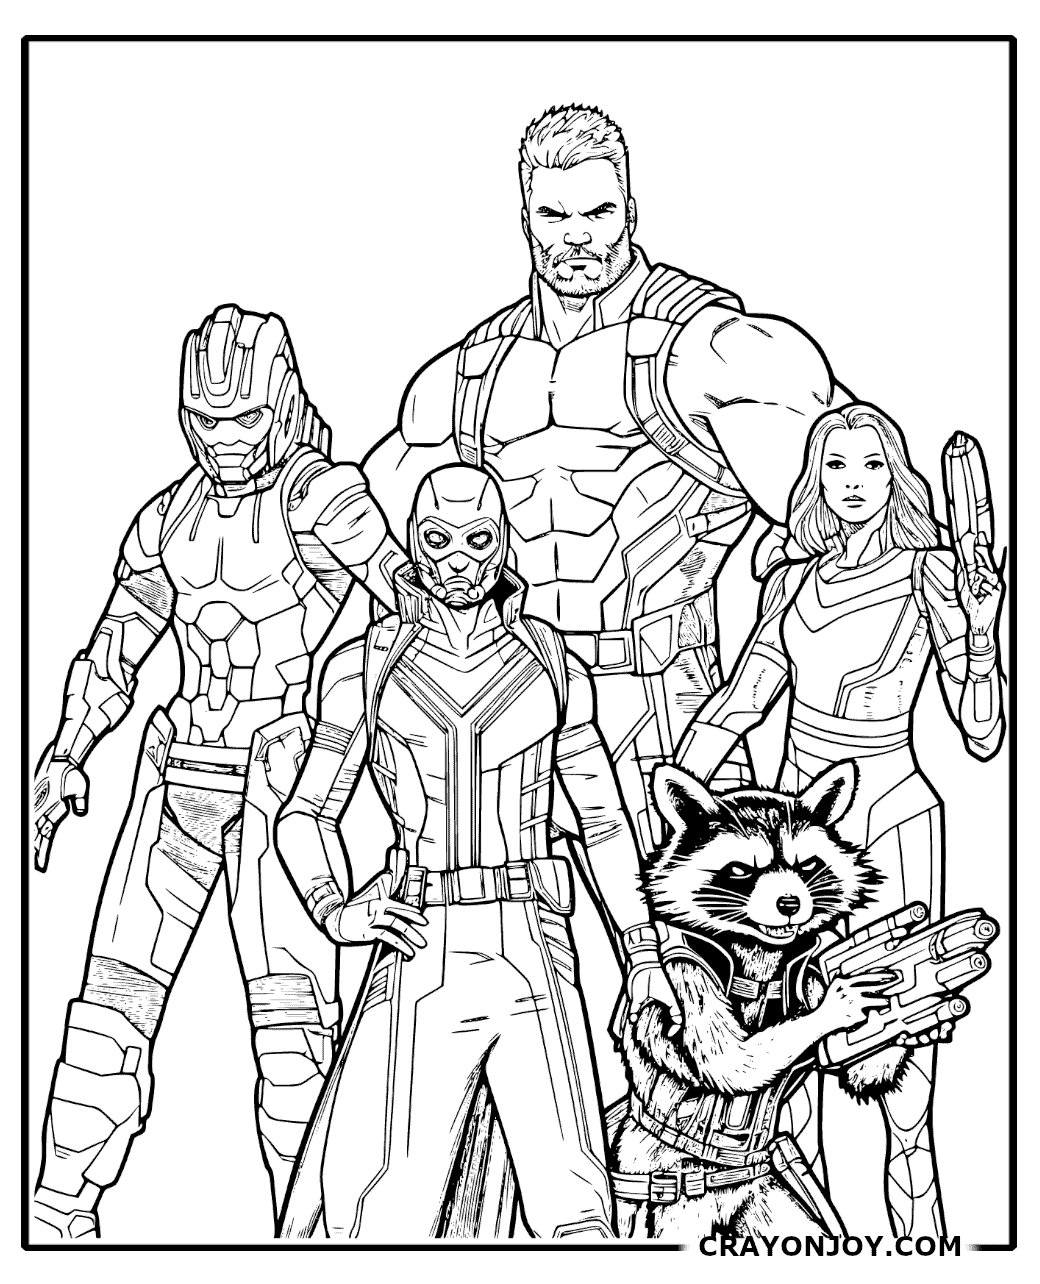 Free Printable Guardians of The Galaxy Coloring Pages for Kids and Adults